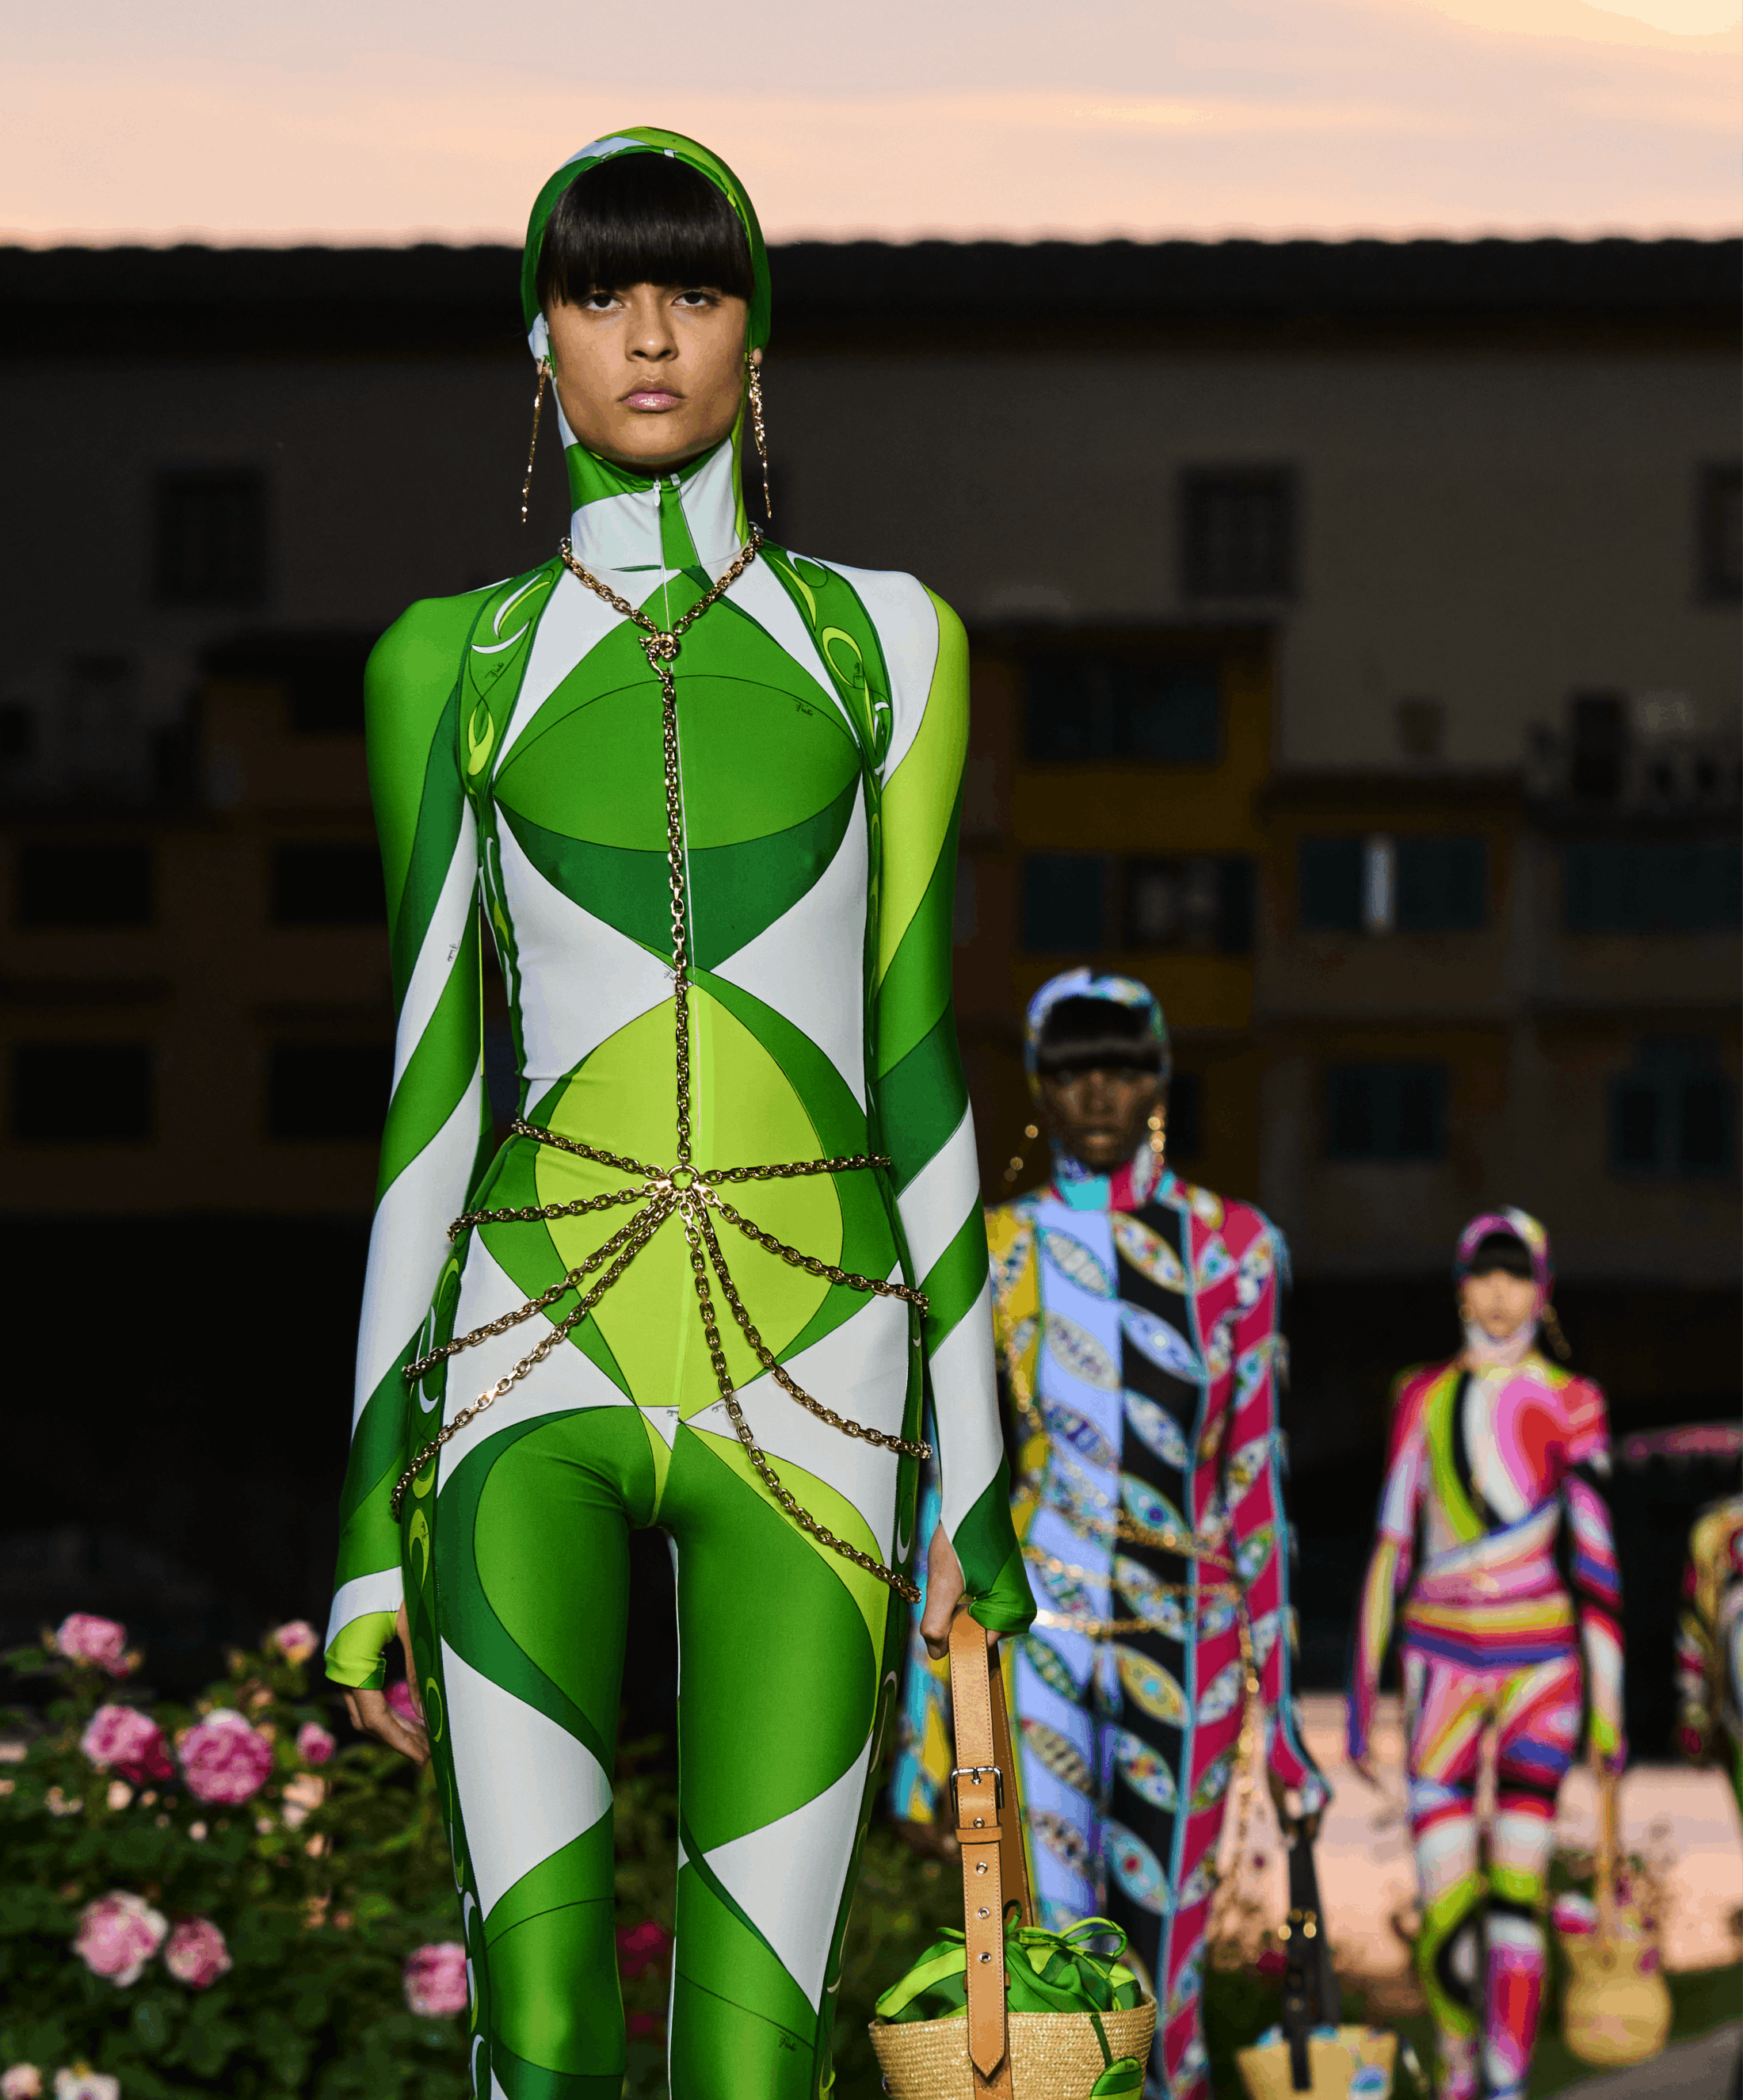 Pucci: Camille Miceli's first fashion show, «Initials E.P.», takes place in  Florence